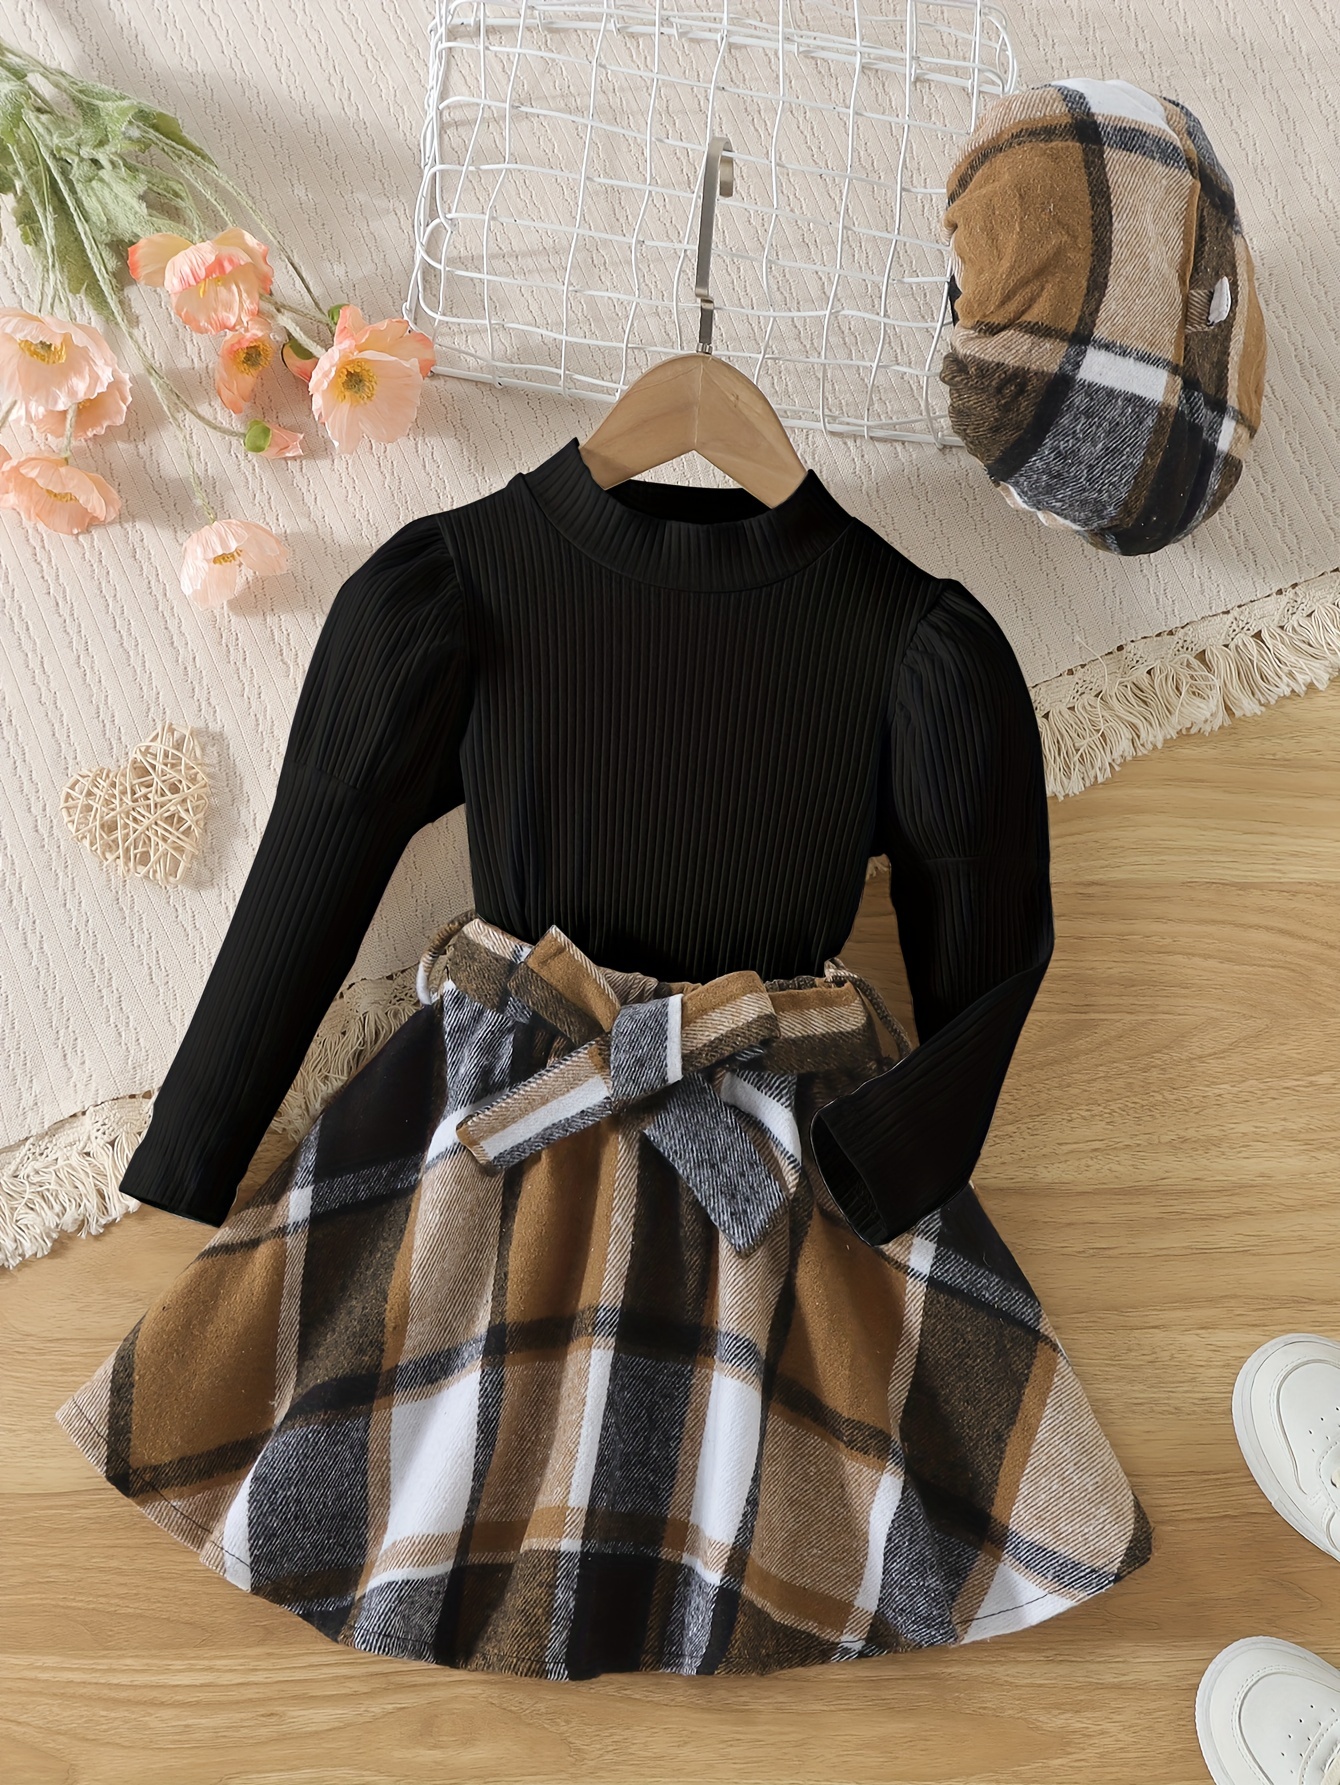 Kids Clothes Girls Set Autumn Winter Wool Coats And Skirts Boutique Kids  Clothing Sets Fashion Casual Teenager Fall Outfits 201126 From Cong06,  $75.43